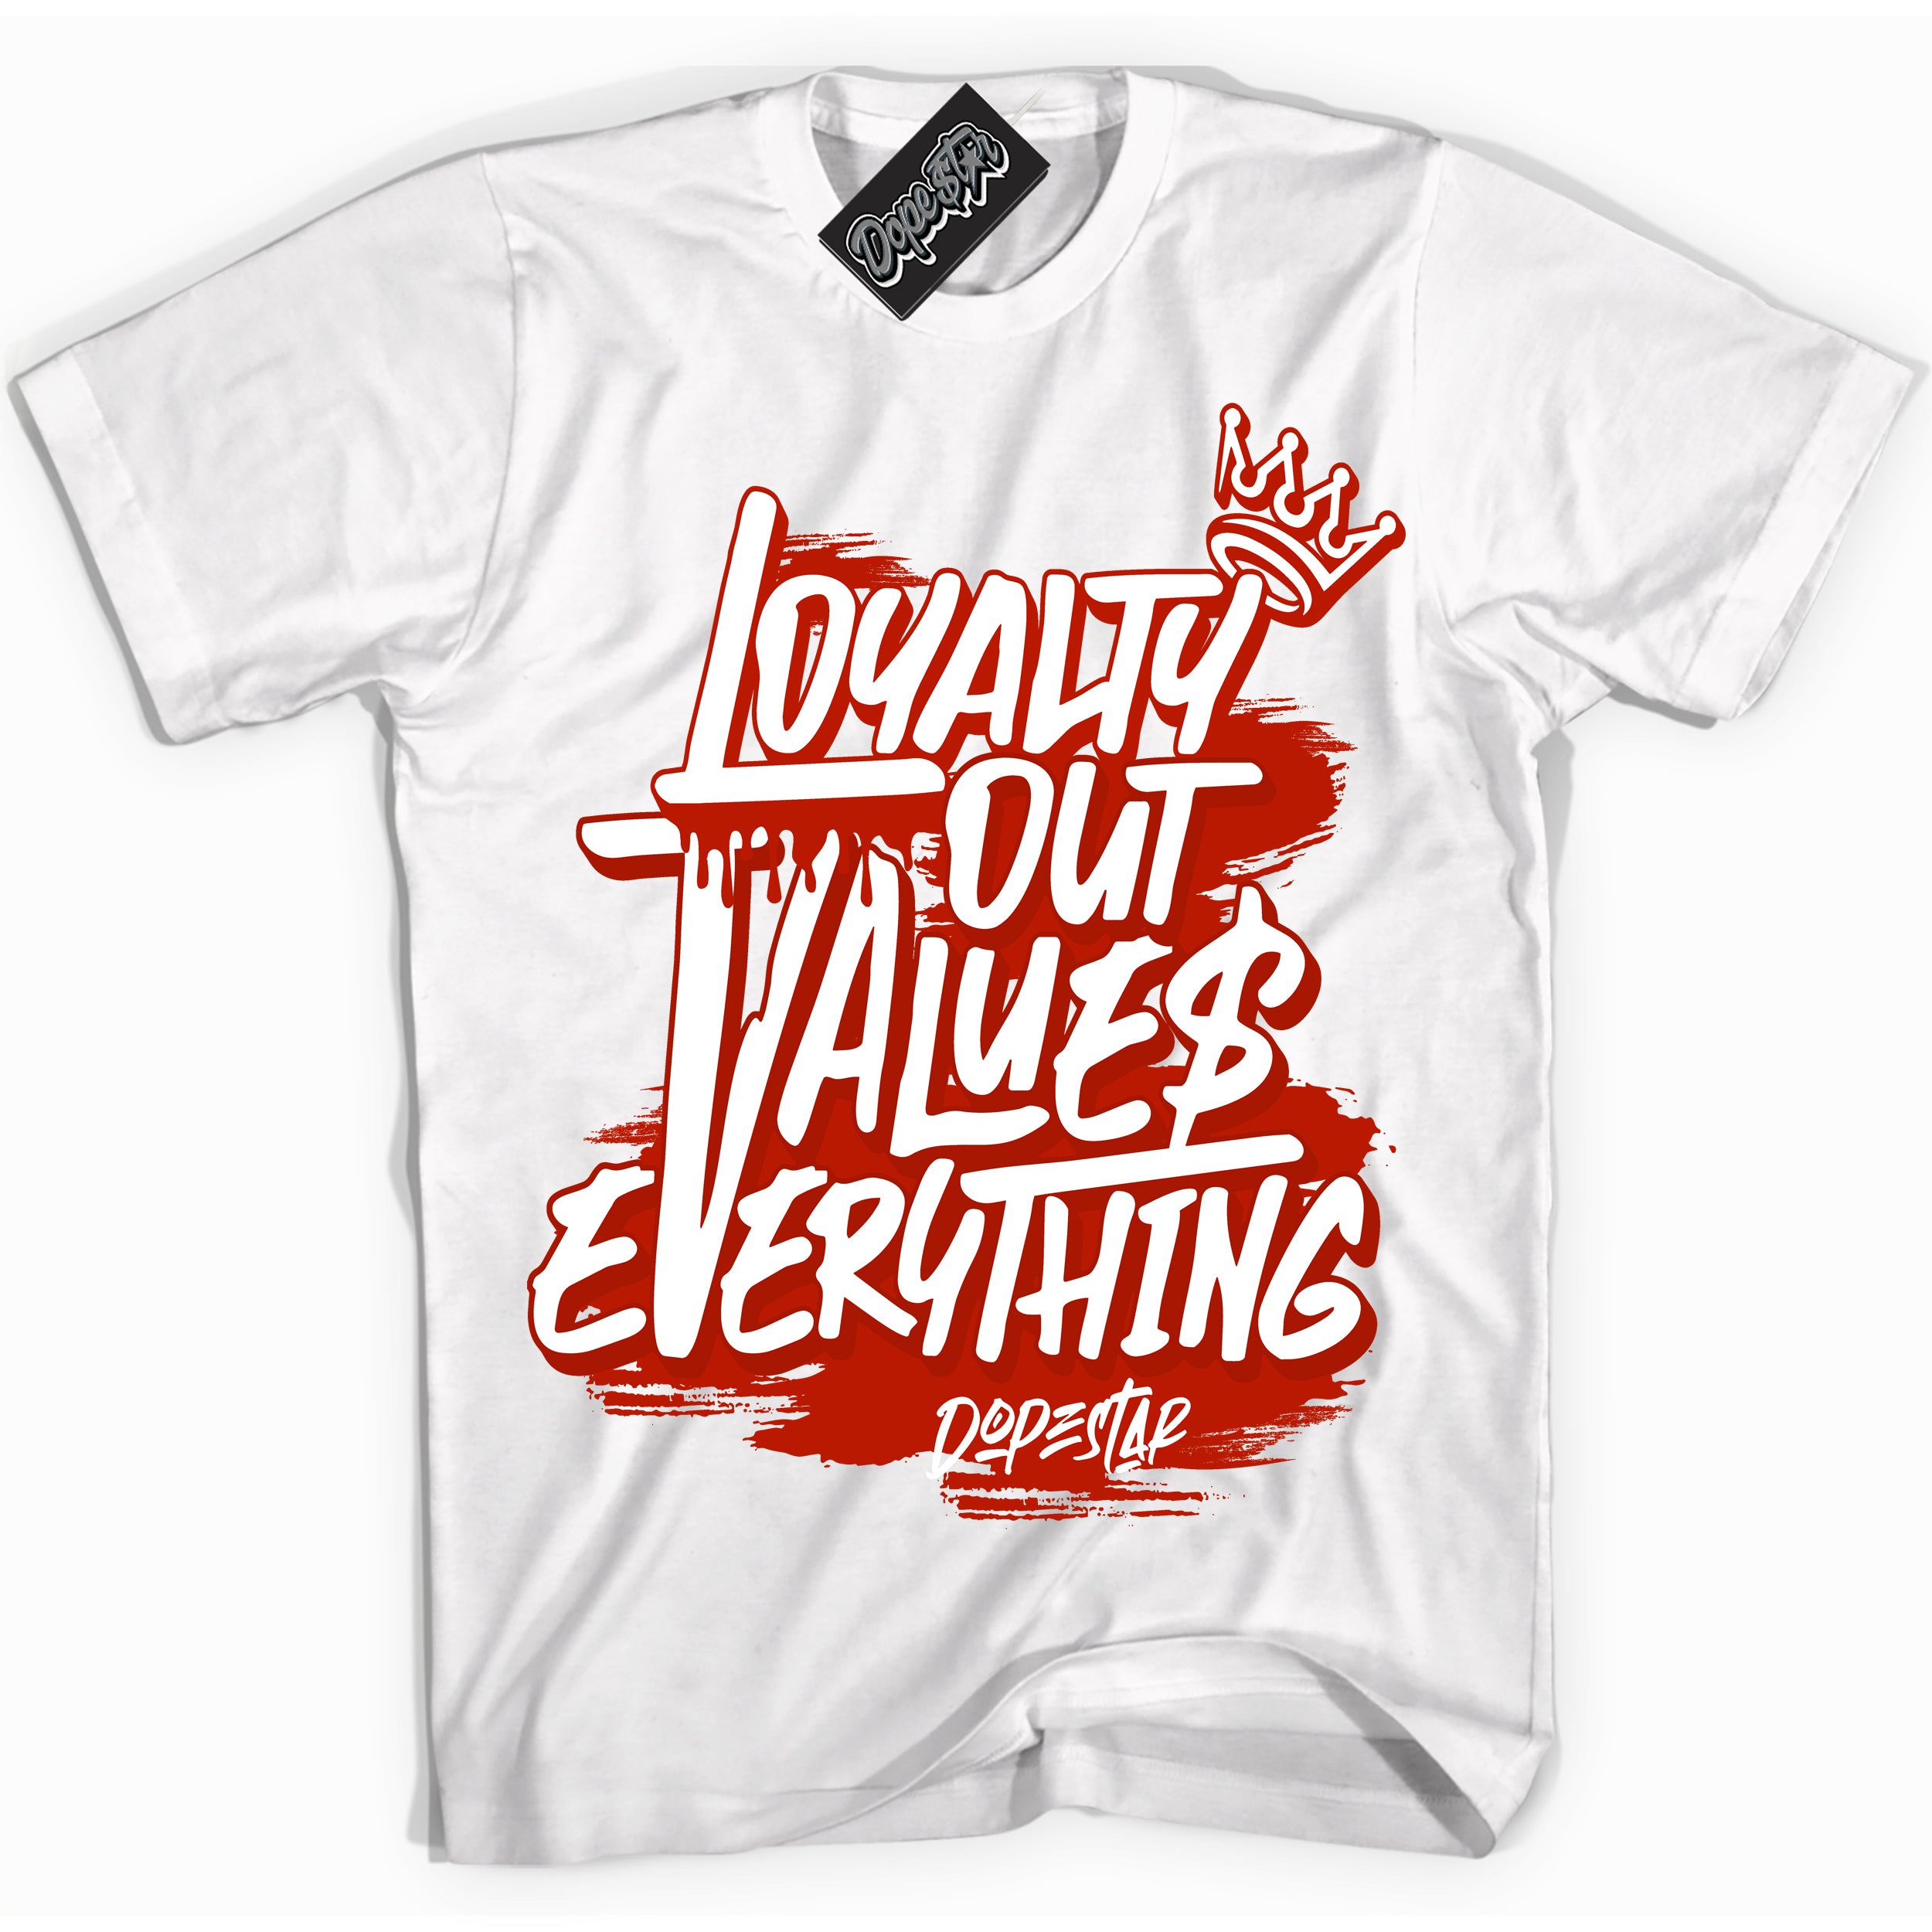 Cool White Shirt with “ Loyalty Out Values Everything” design that perfectly matches Cherry 11s Sneakers.